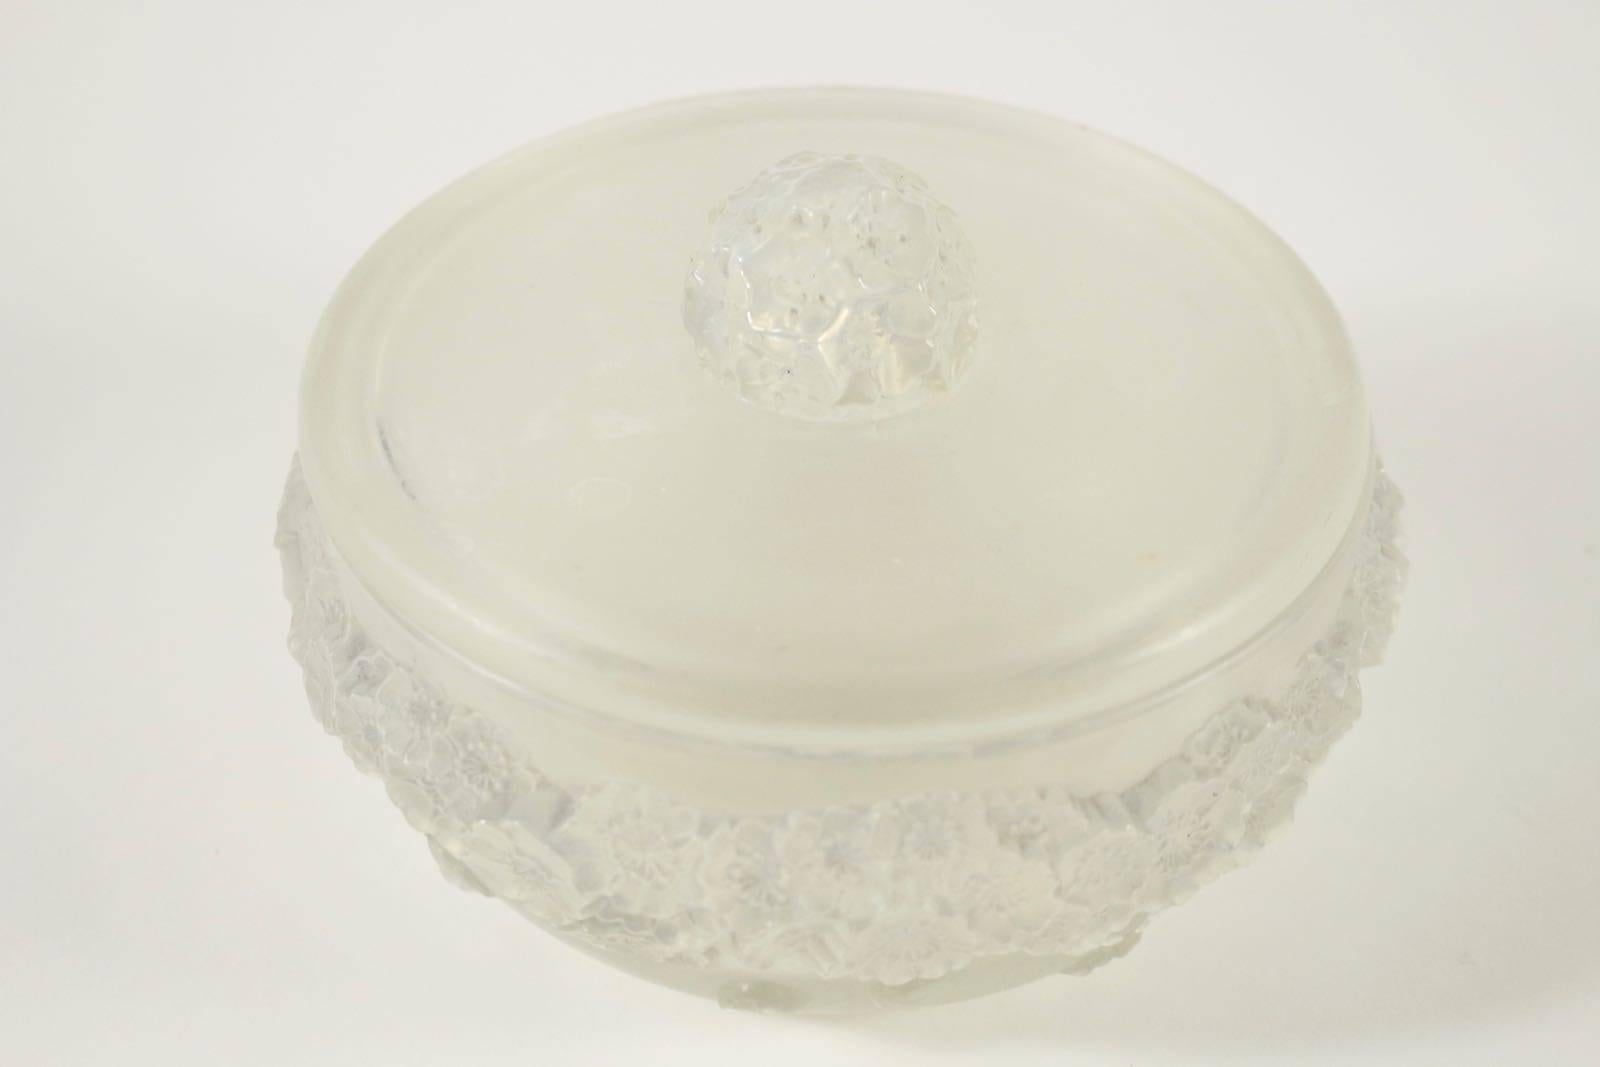 René Lalique
'Primevères' a box and cover,
heavy round high relief floral decoration with flat cover and matching floral handle
Round box 